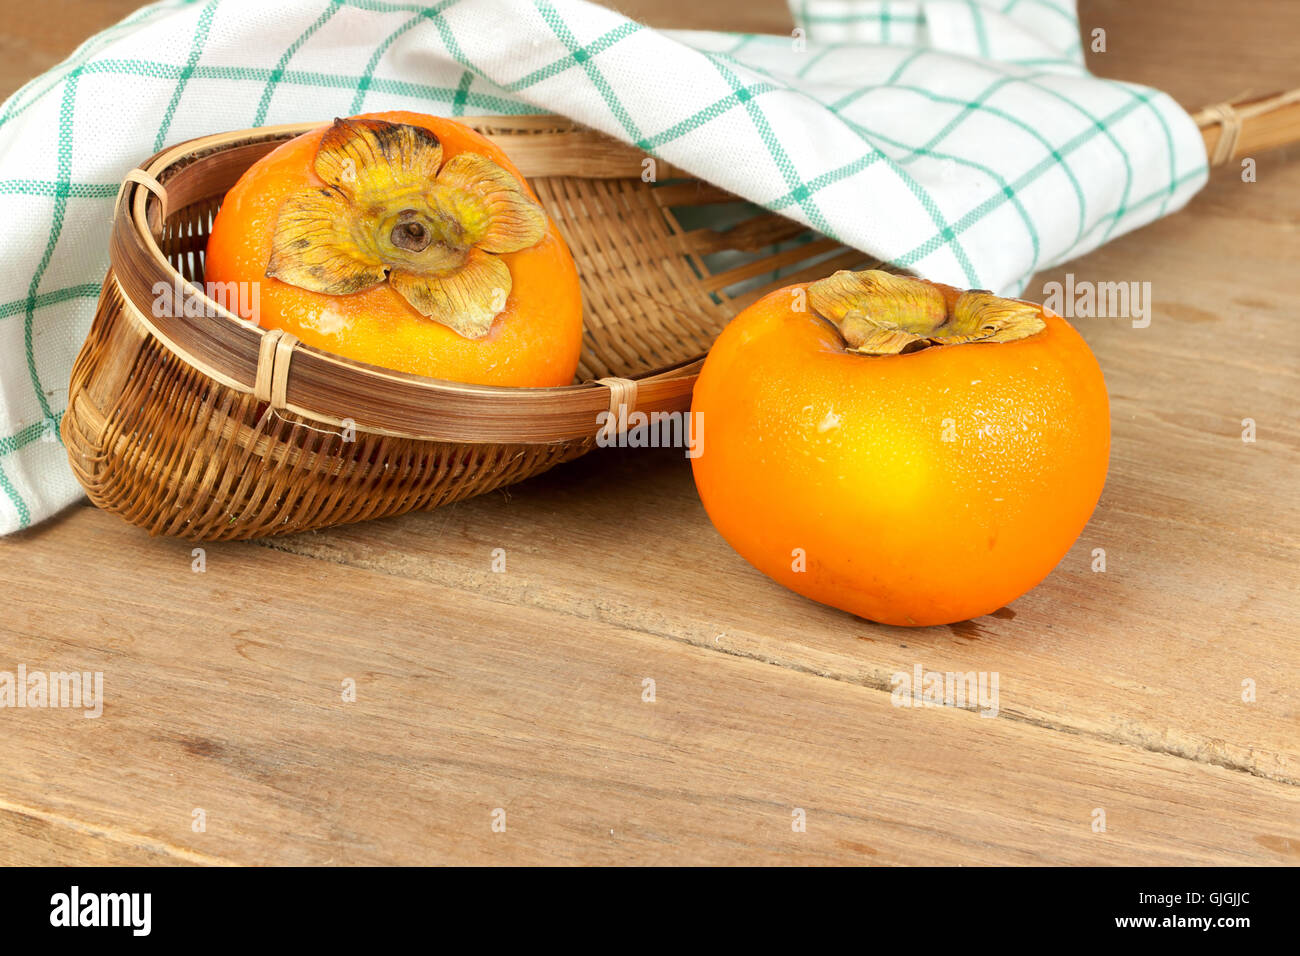 Persimmon yellow color ripe fruits on wood table Stock Photo